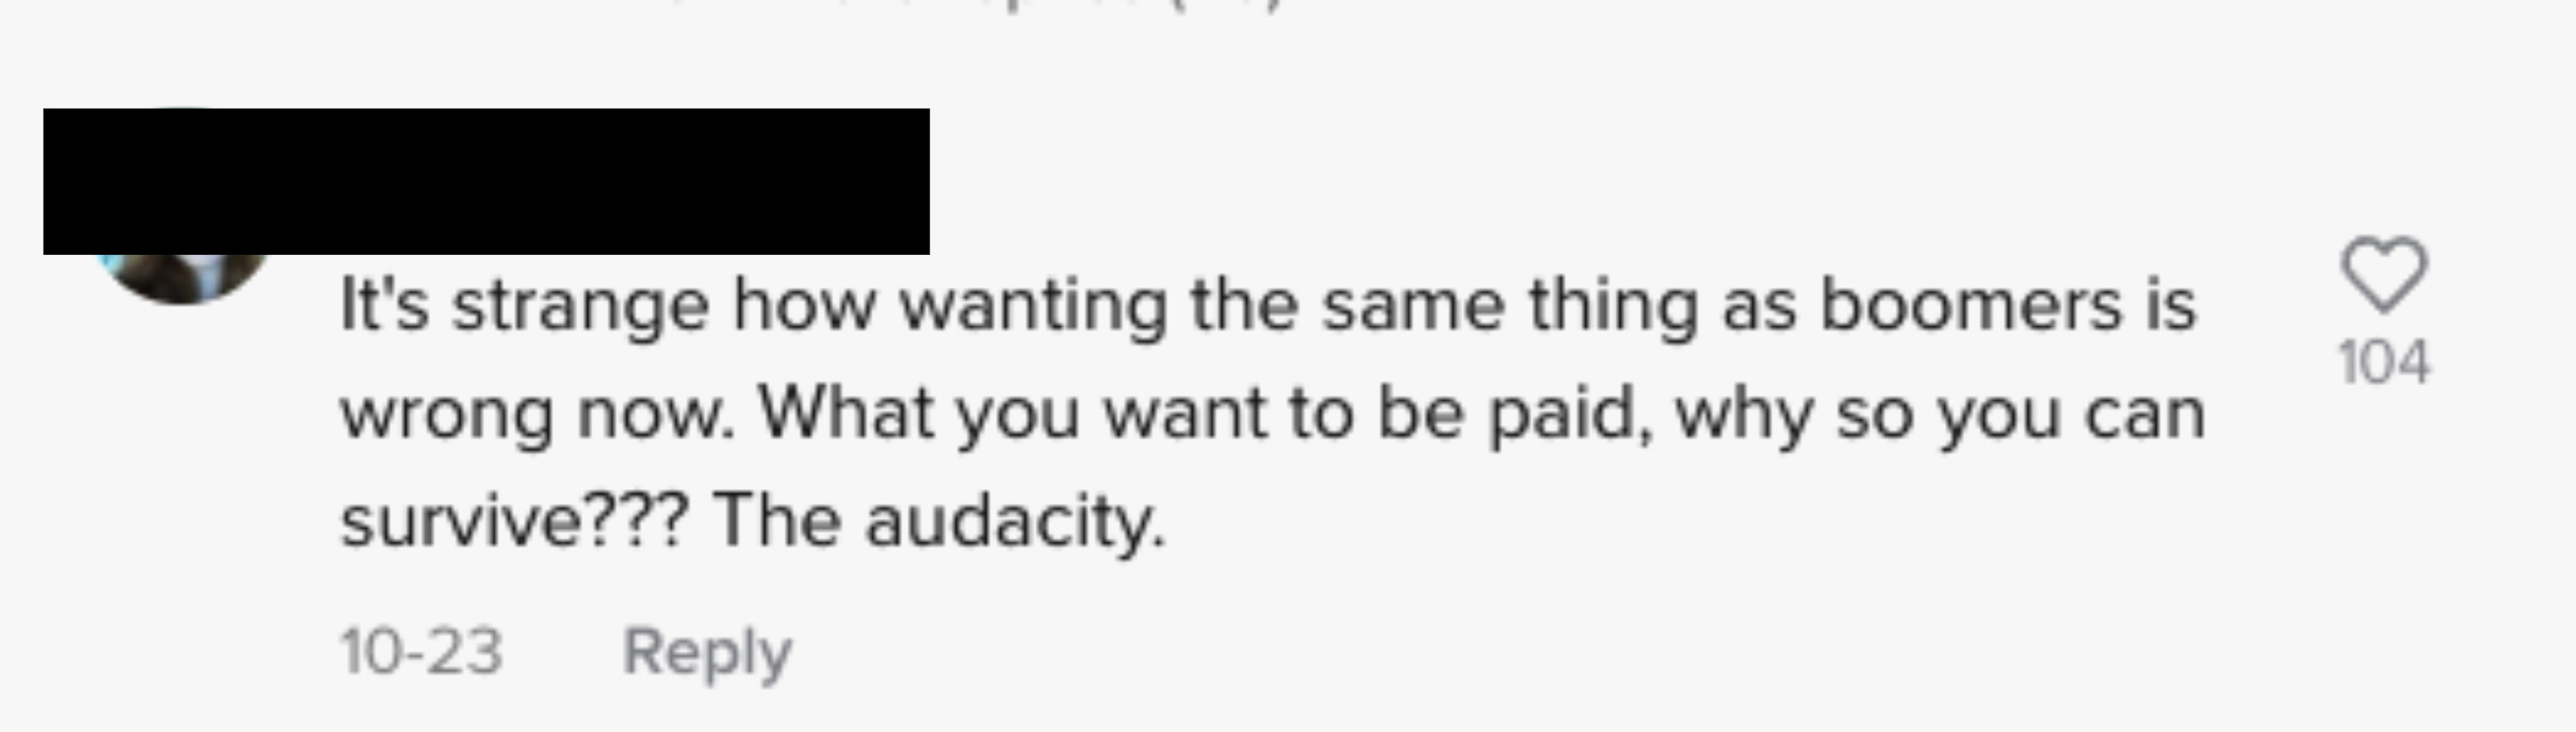 text: it&#x27;s strange how wanting the same thing as boomers is wrong now. you want to be paid? why so you can survive? the audacity